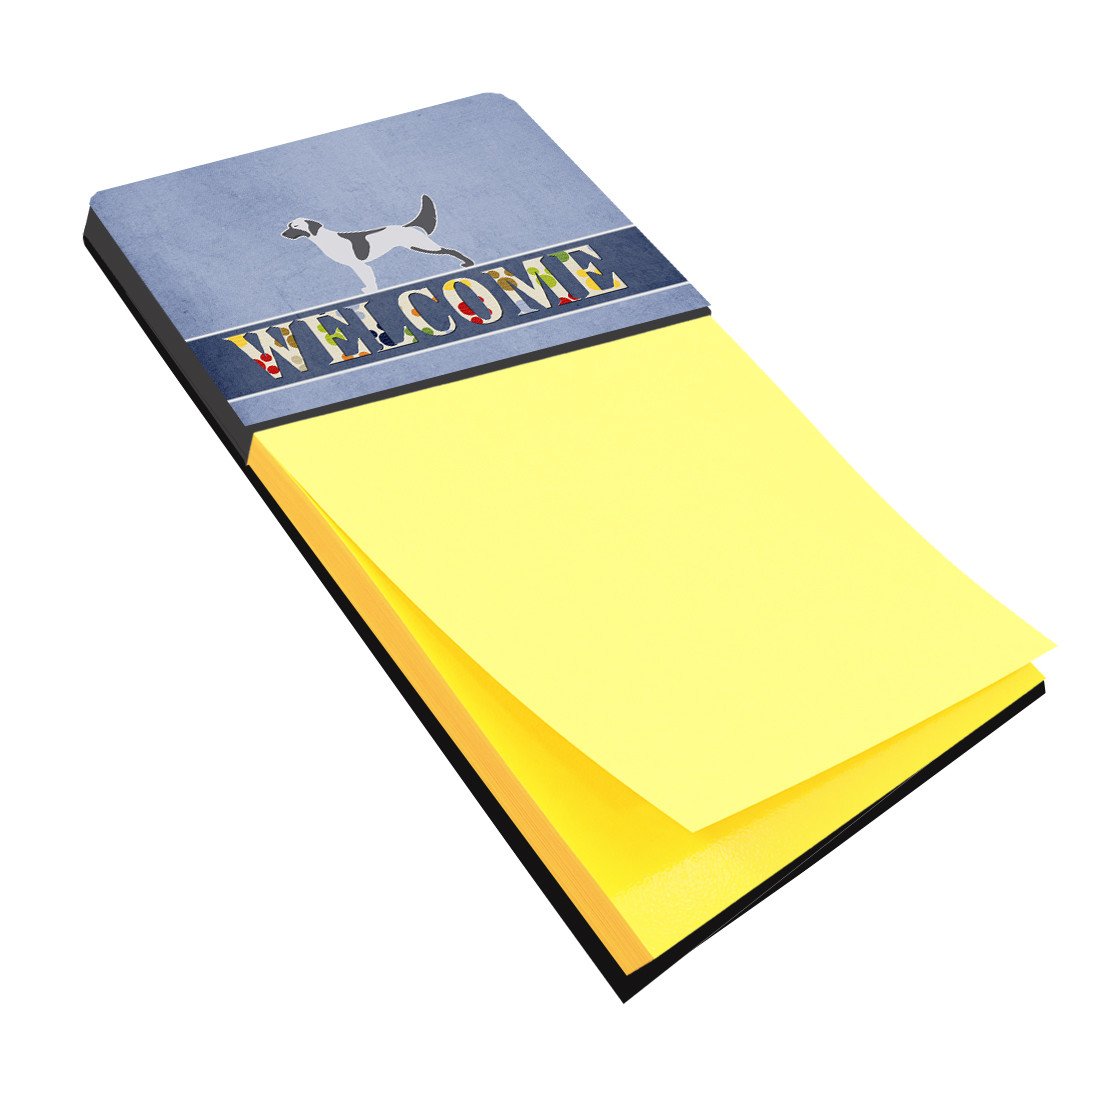 English Setter Welcome Sticky Note Holder BB5485SN by Caroline's Treasures